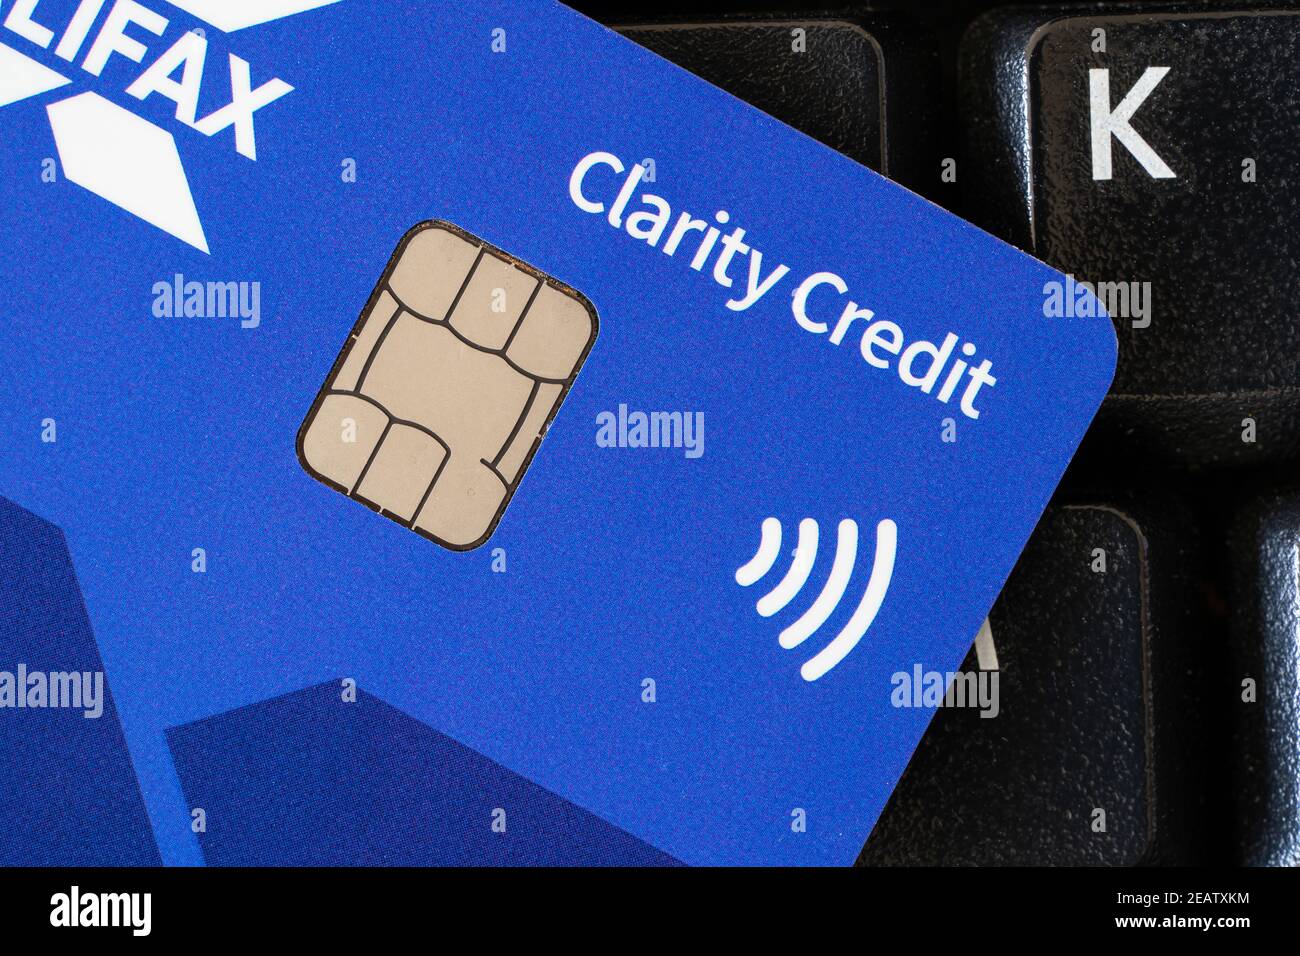 Closeup on a Halifax Clarity Card - a UK credit card showing a chip and the logo for contactless payment. Theme: chip and pin, debt, cashless payment Stock Photo